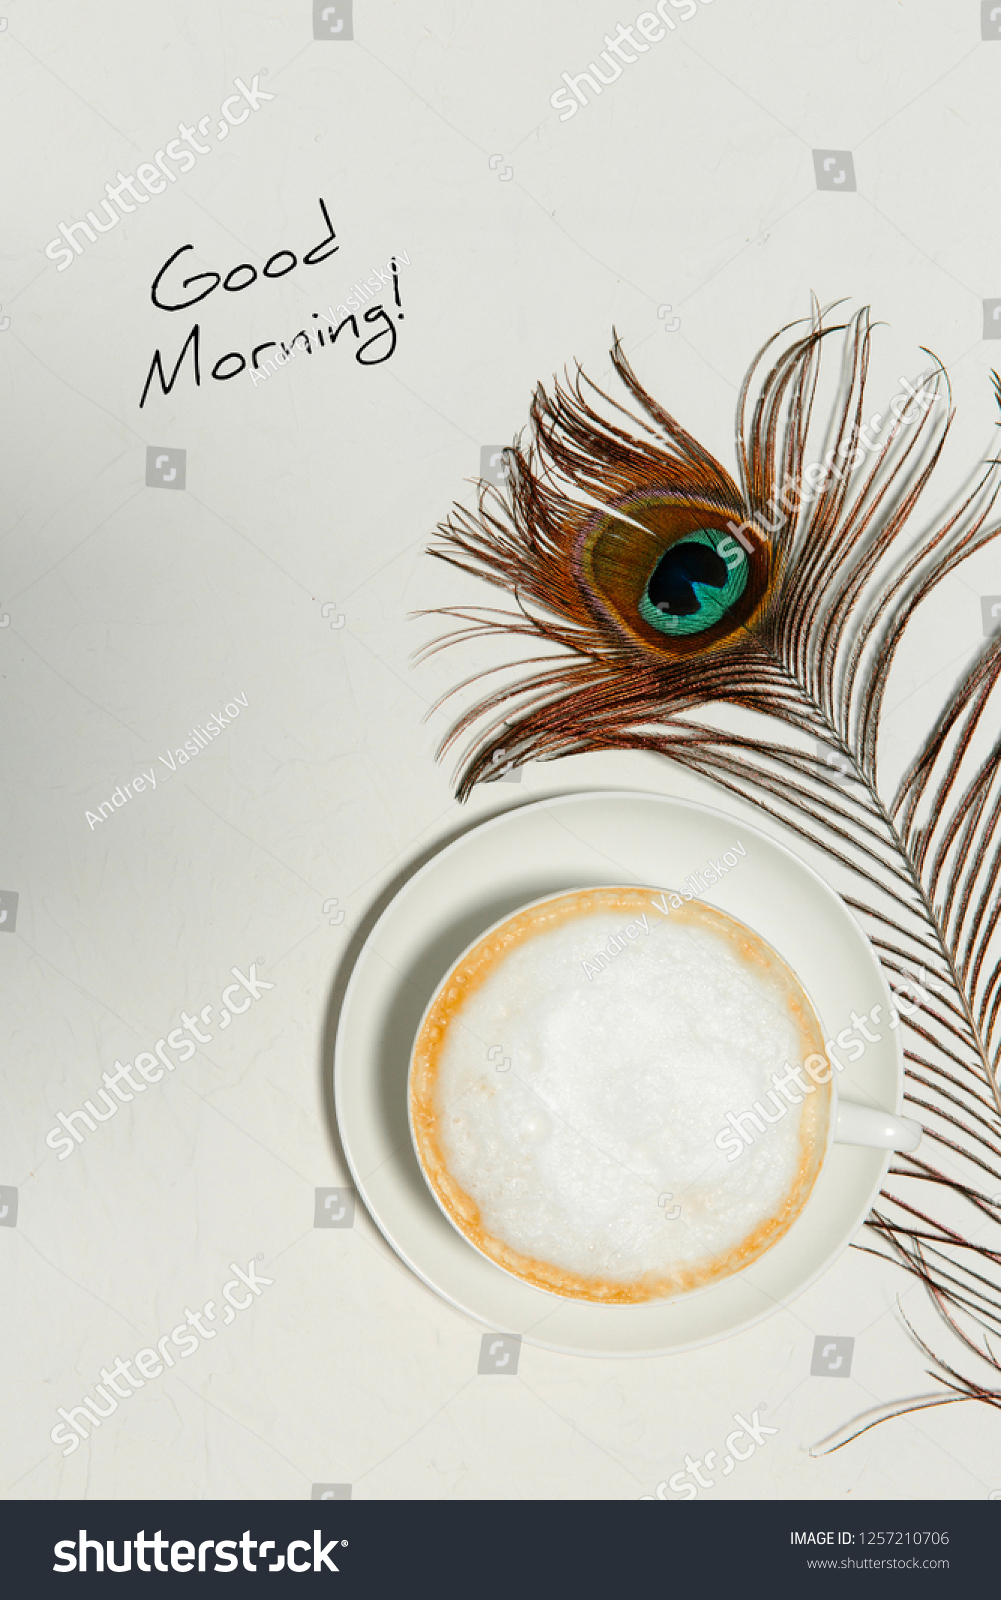 Cup Coffee Peacock Feather Good Morning Royalty Free Stock Image